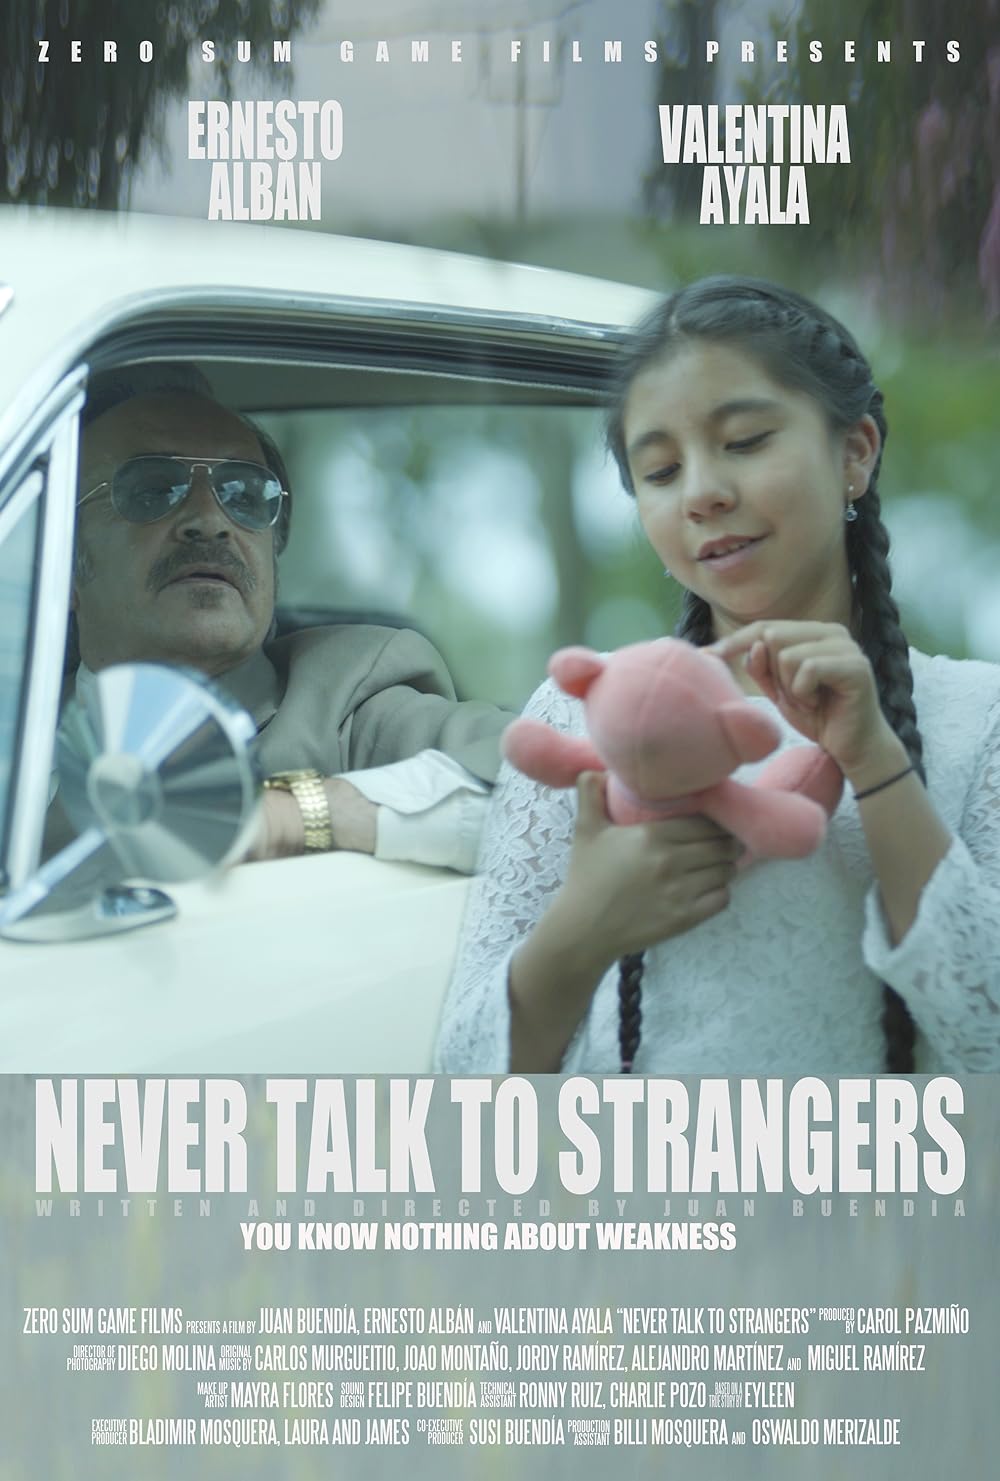 dale kuhns recommends never talk to strangers full movie pic